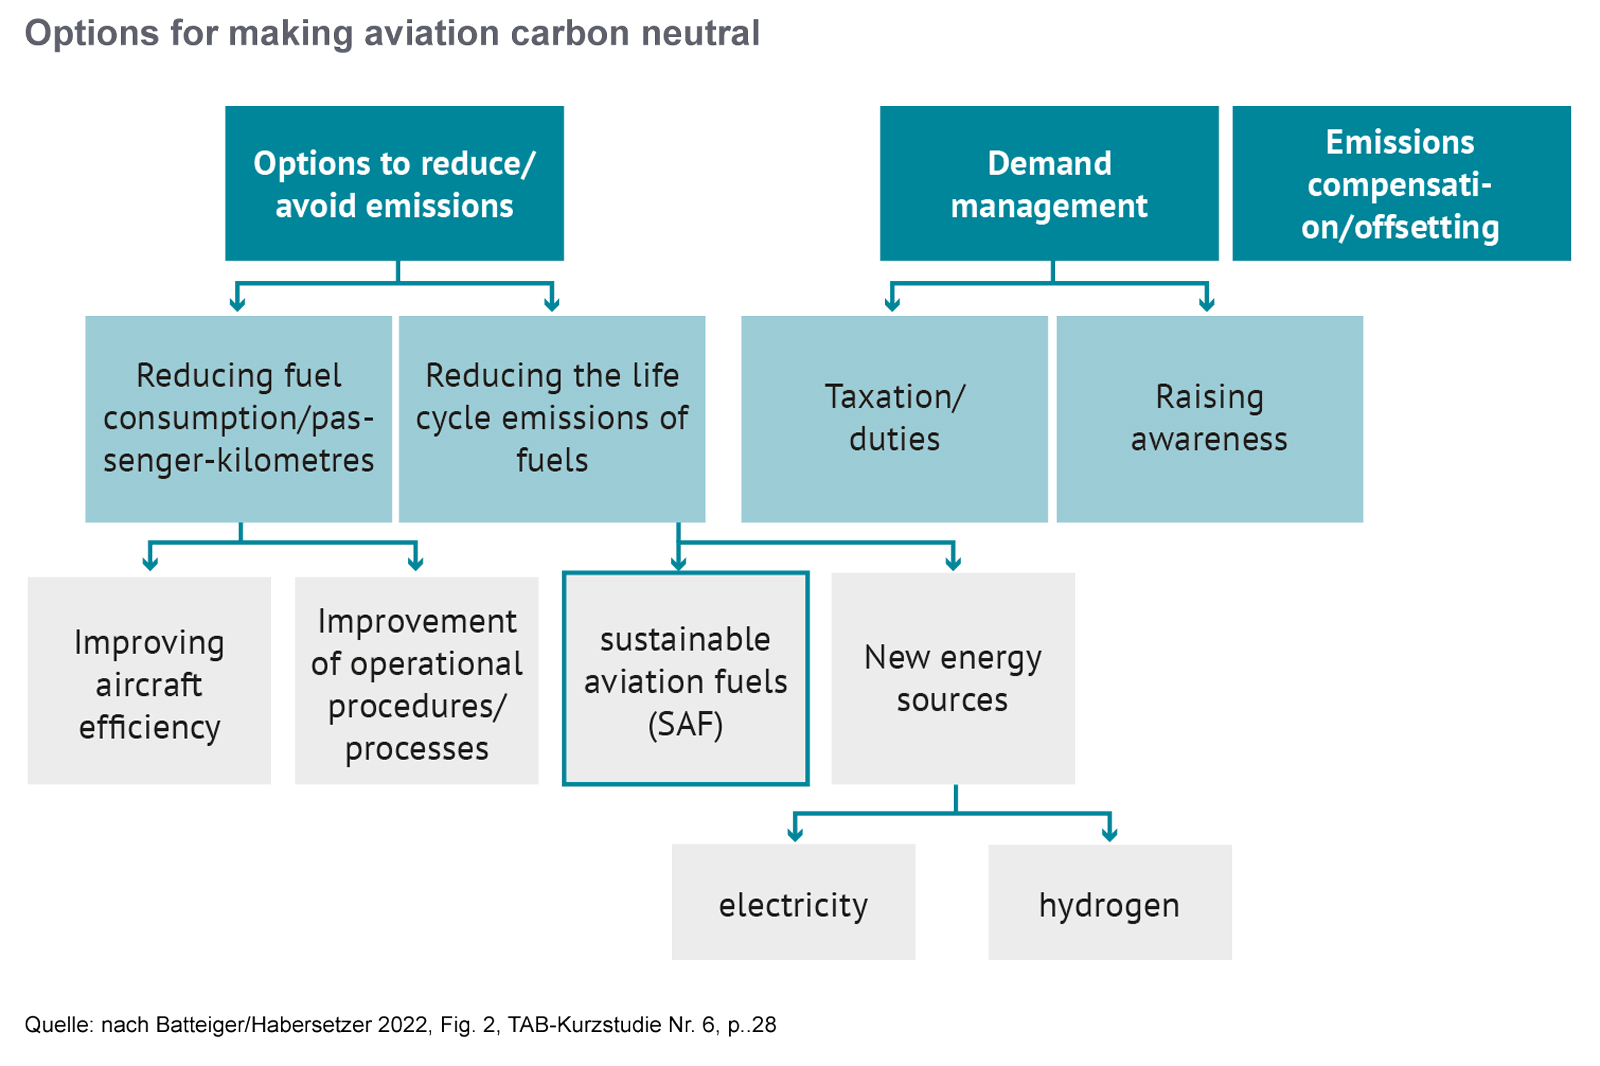 Options for shaping climate-neutral aviation The flowchart shows possible approaches based on political starting points and the associated measures for climate-neutral aviation